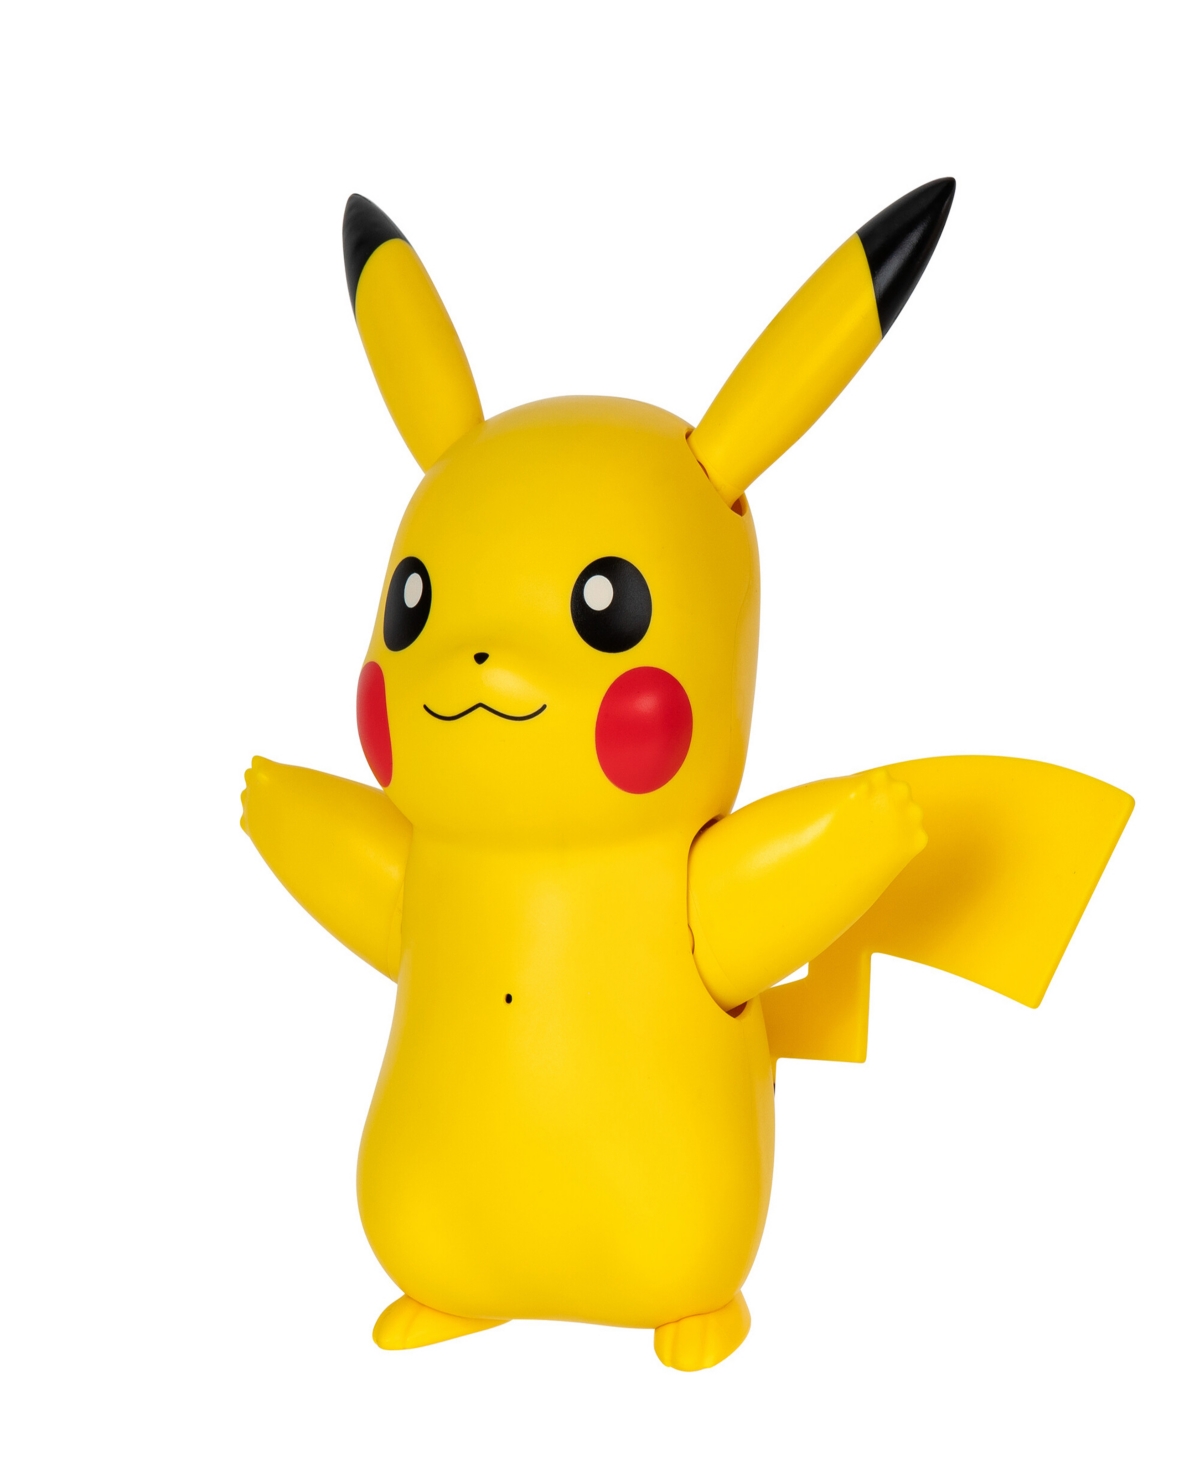 Shop Pokémon Pikachu Train And Play Deluxe Interactive Action Figure In Multi Color